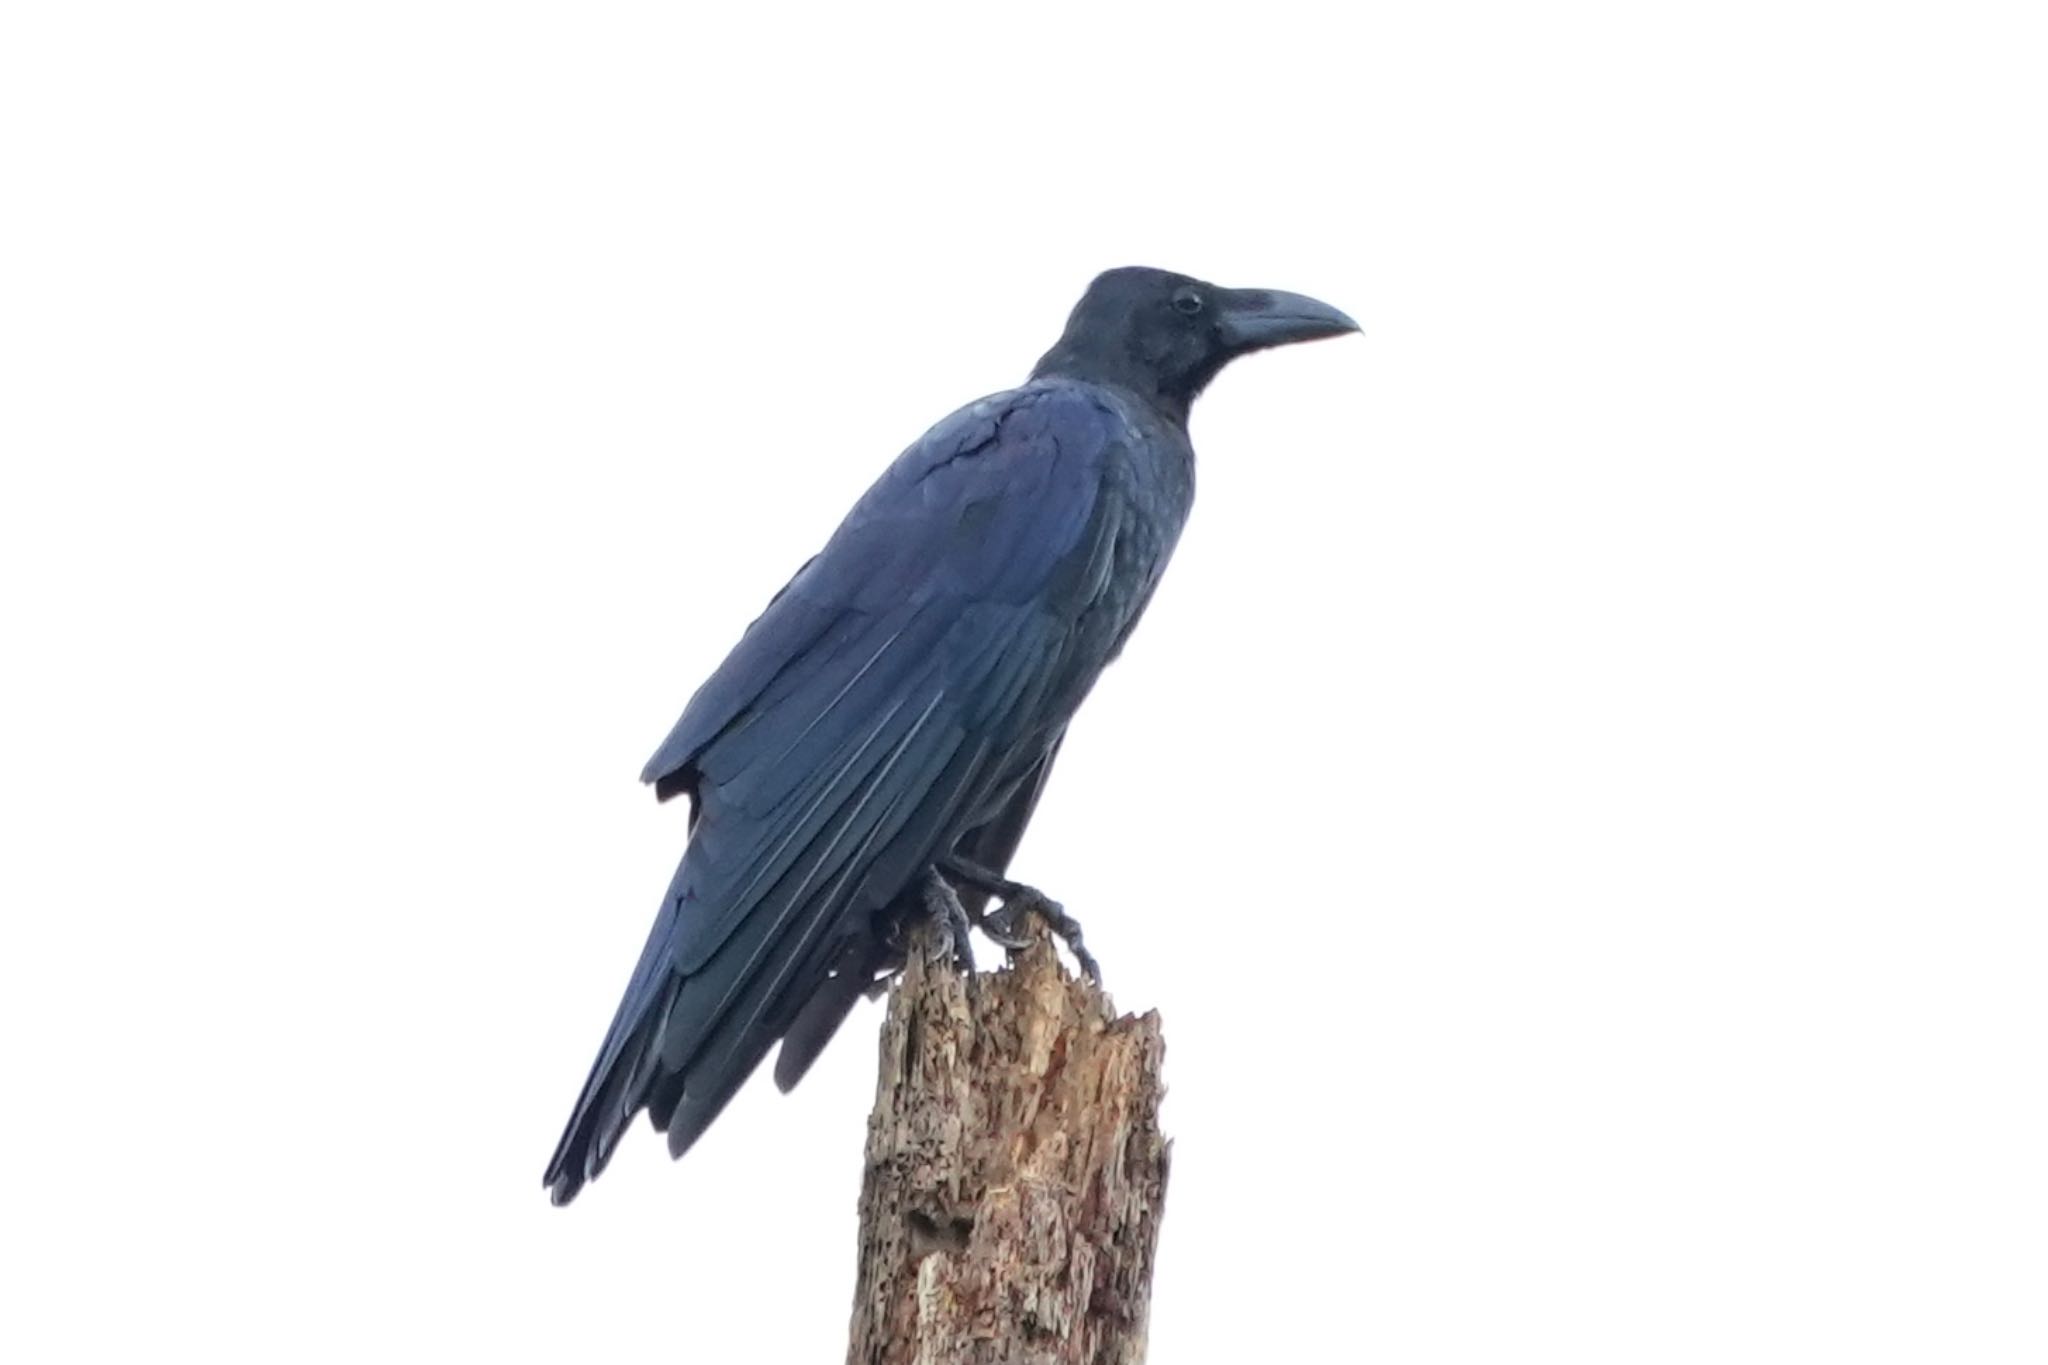 Large-billed crow(connectens)